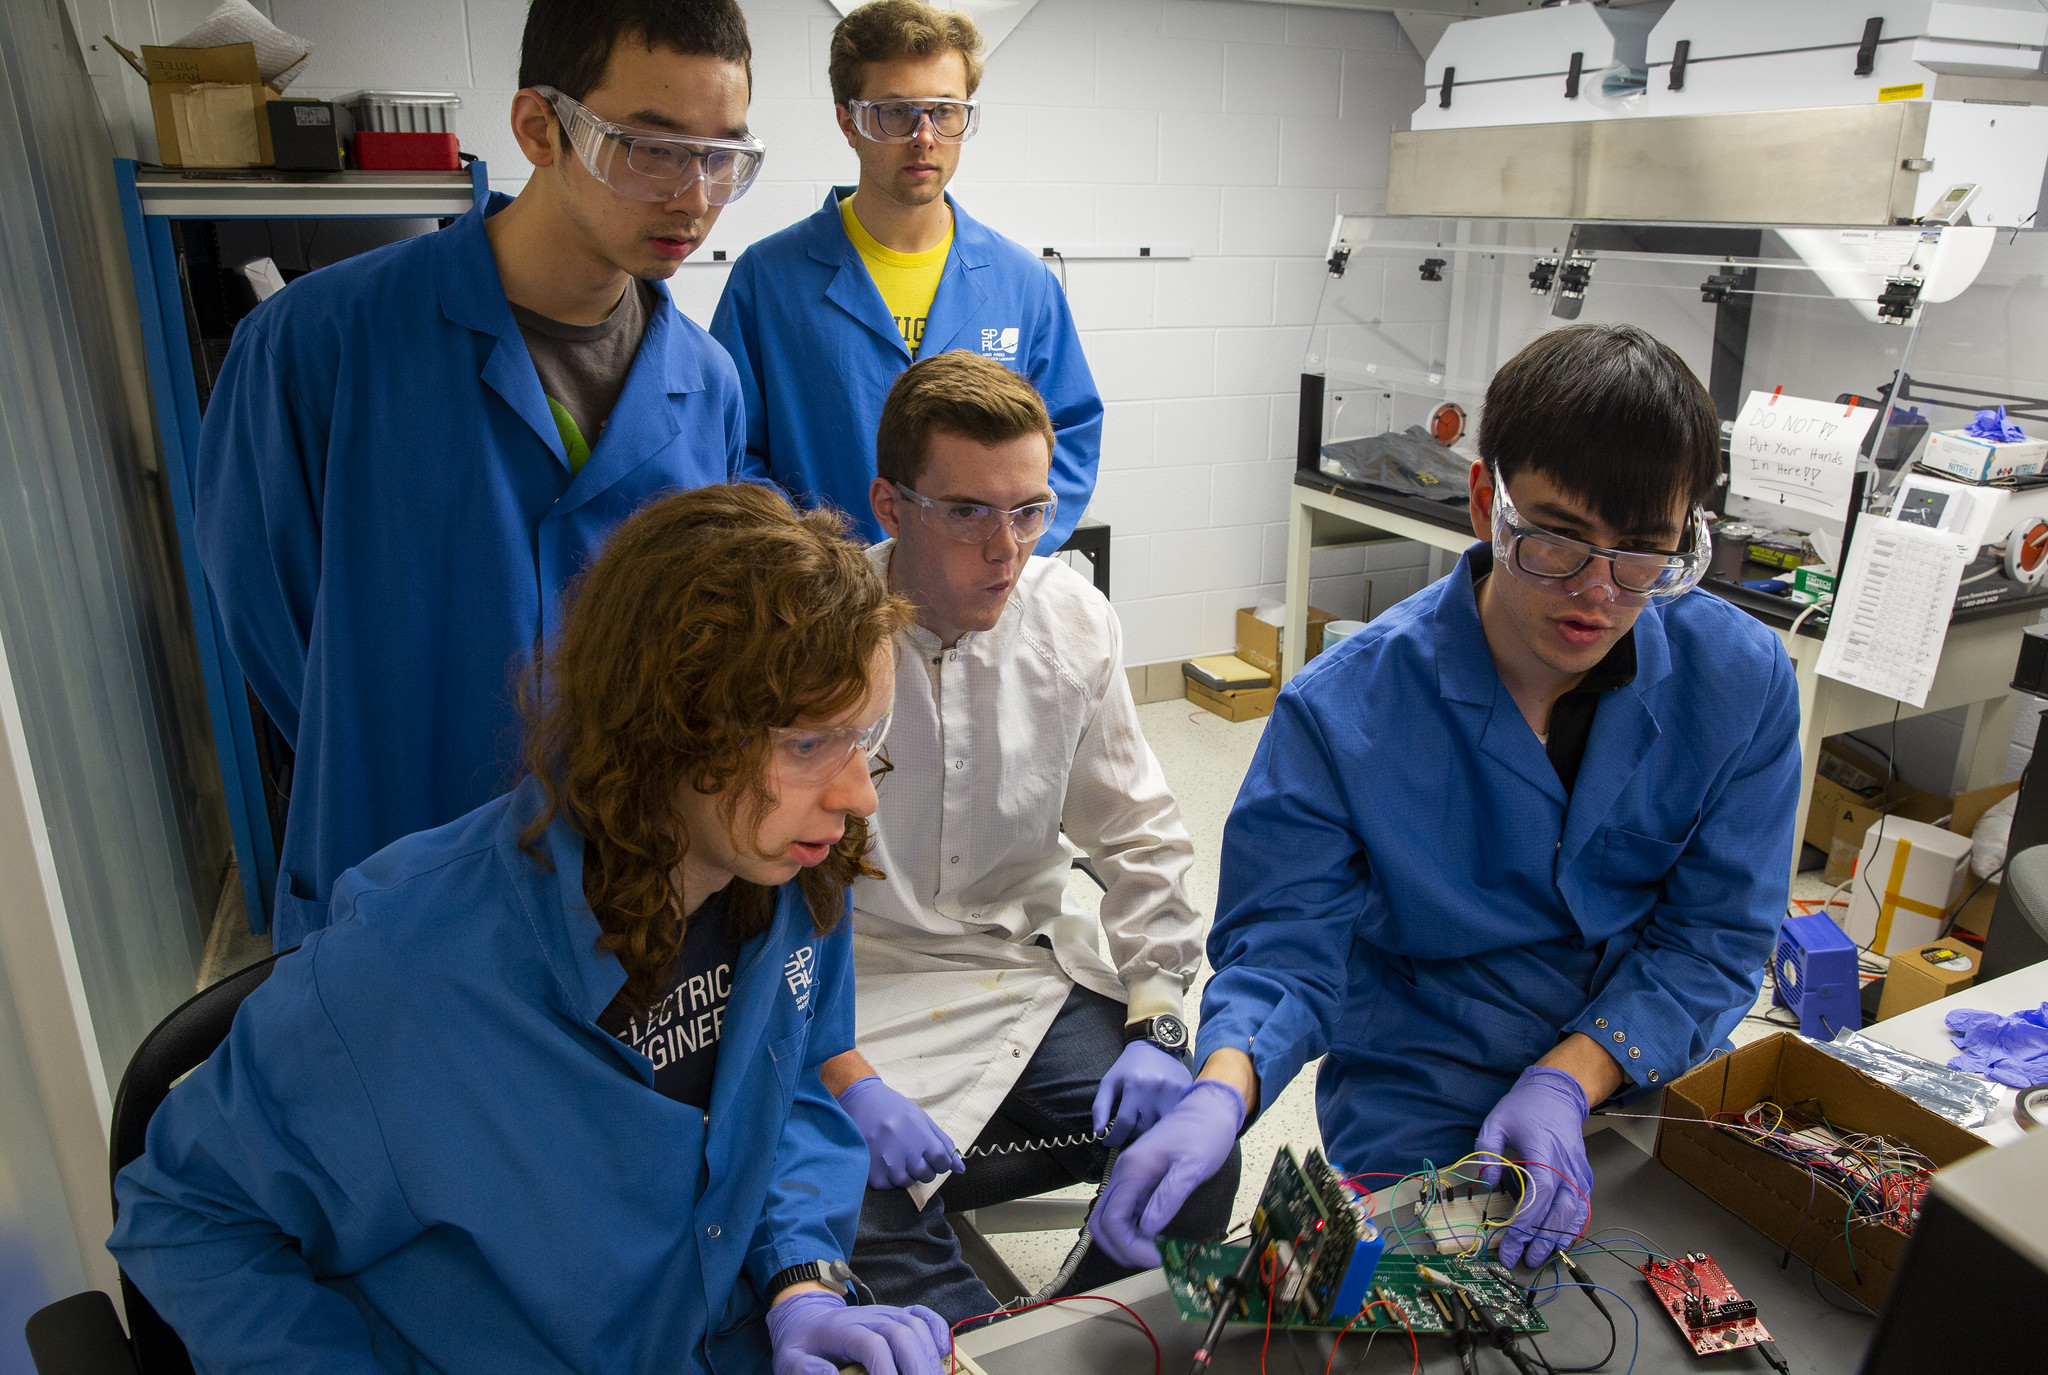 Five MiTee team members working on a cluster of wires.